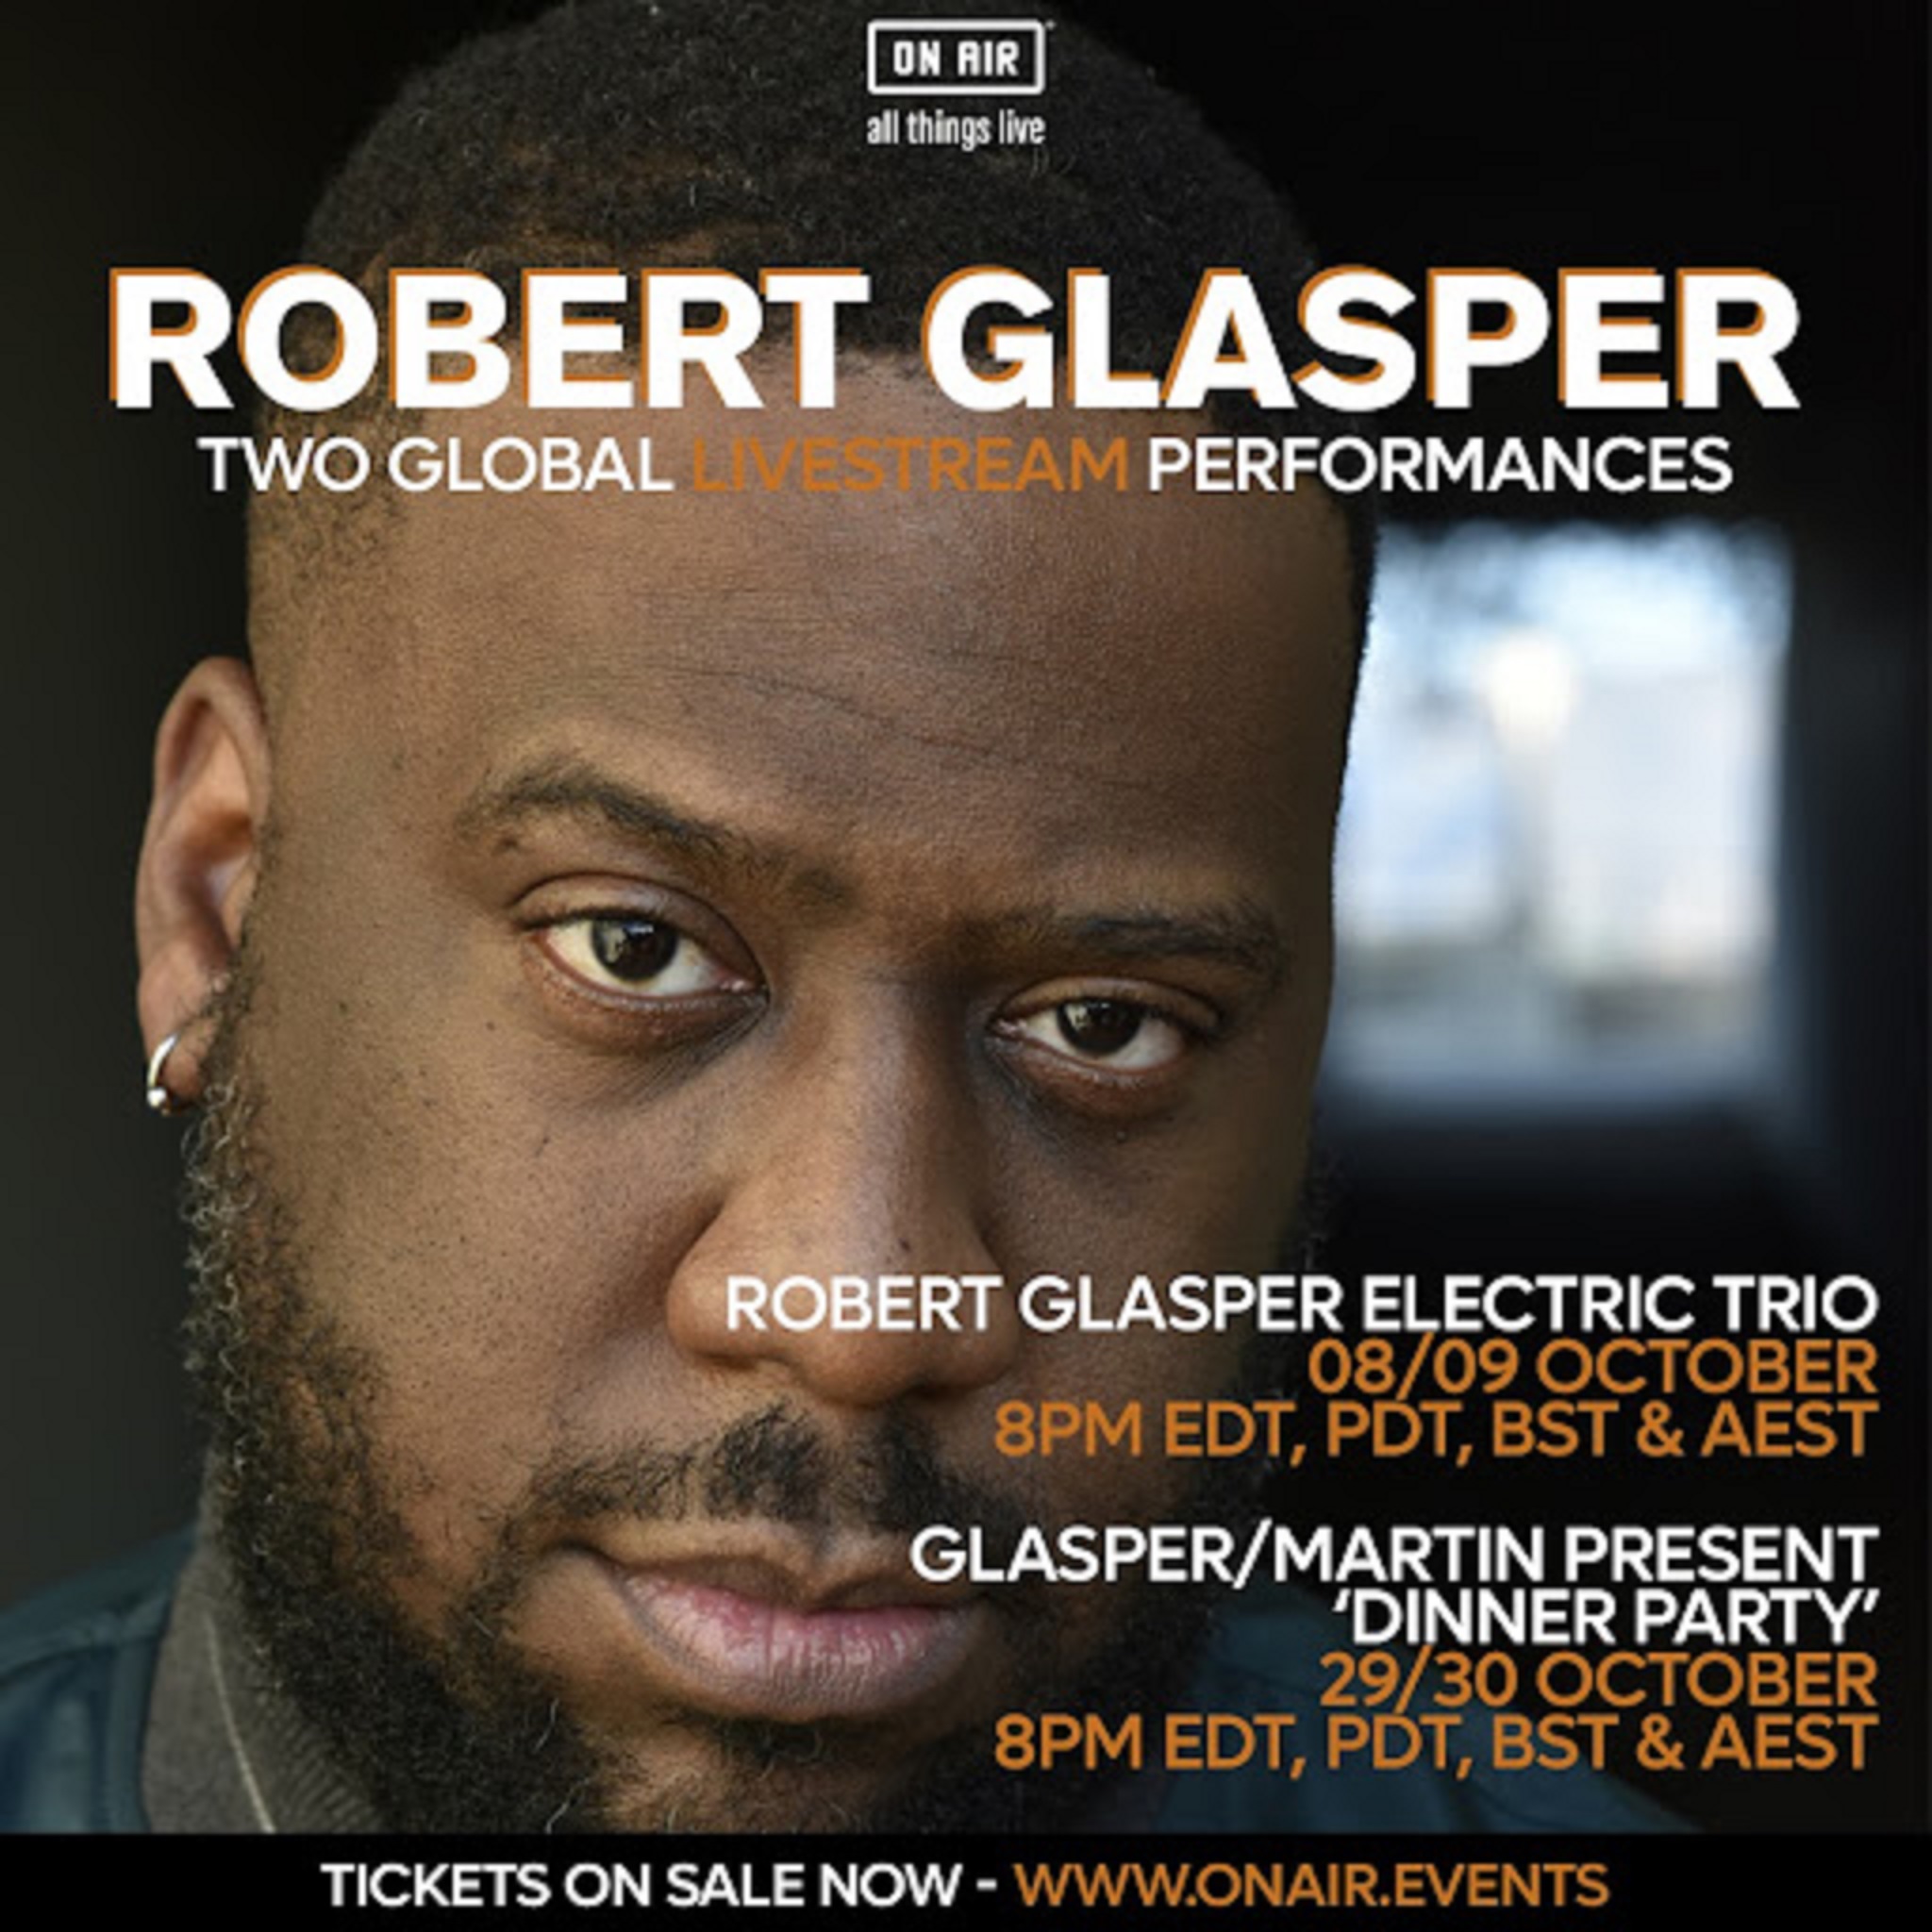 Robert Glasper Announces Two Live Stream Events In Partnership With On Air